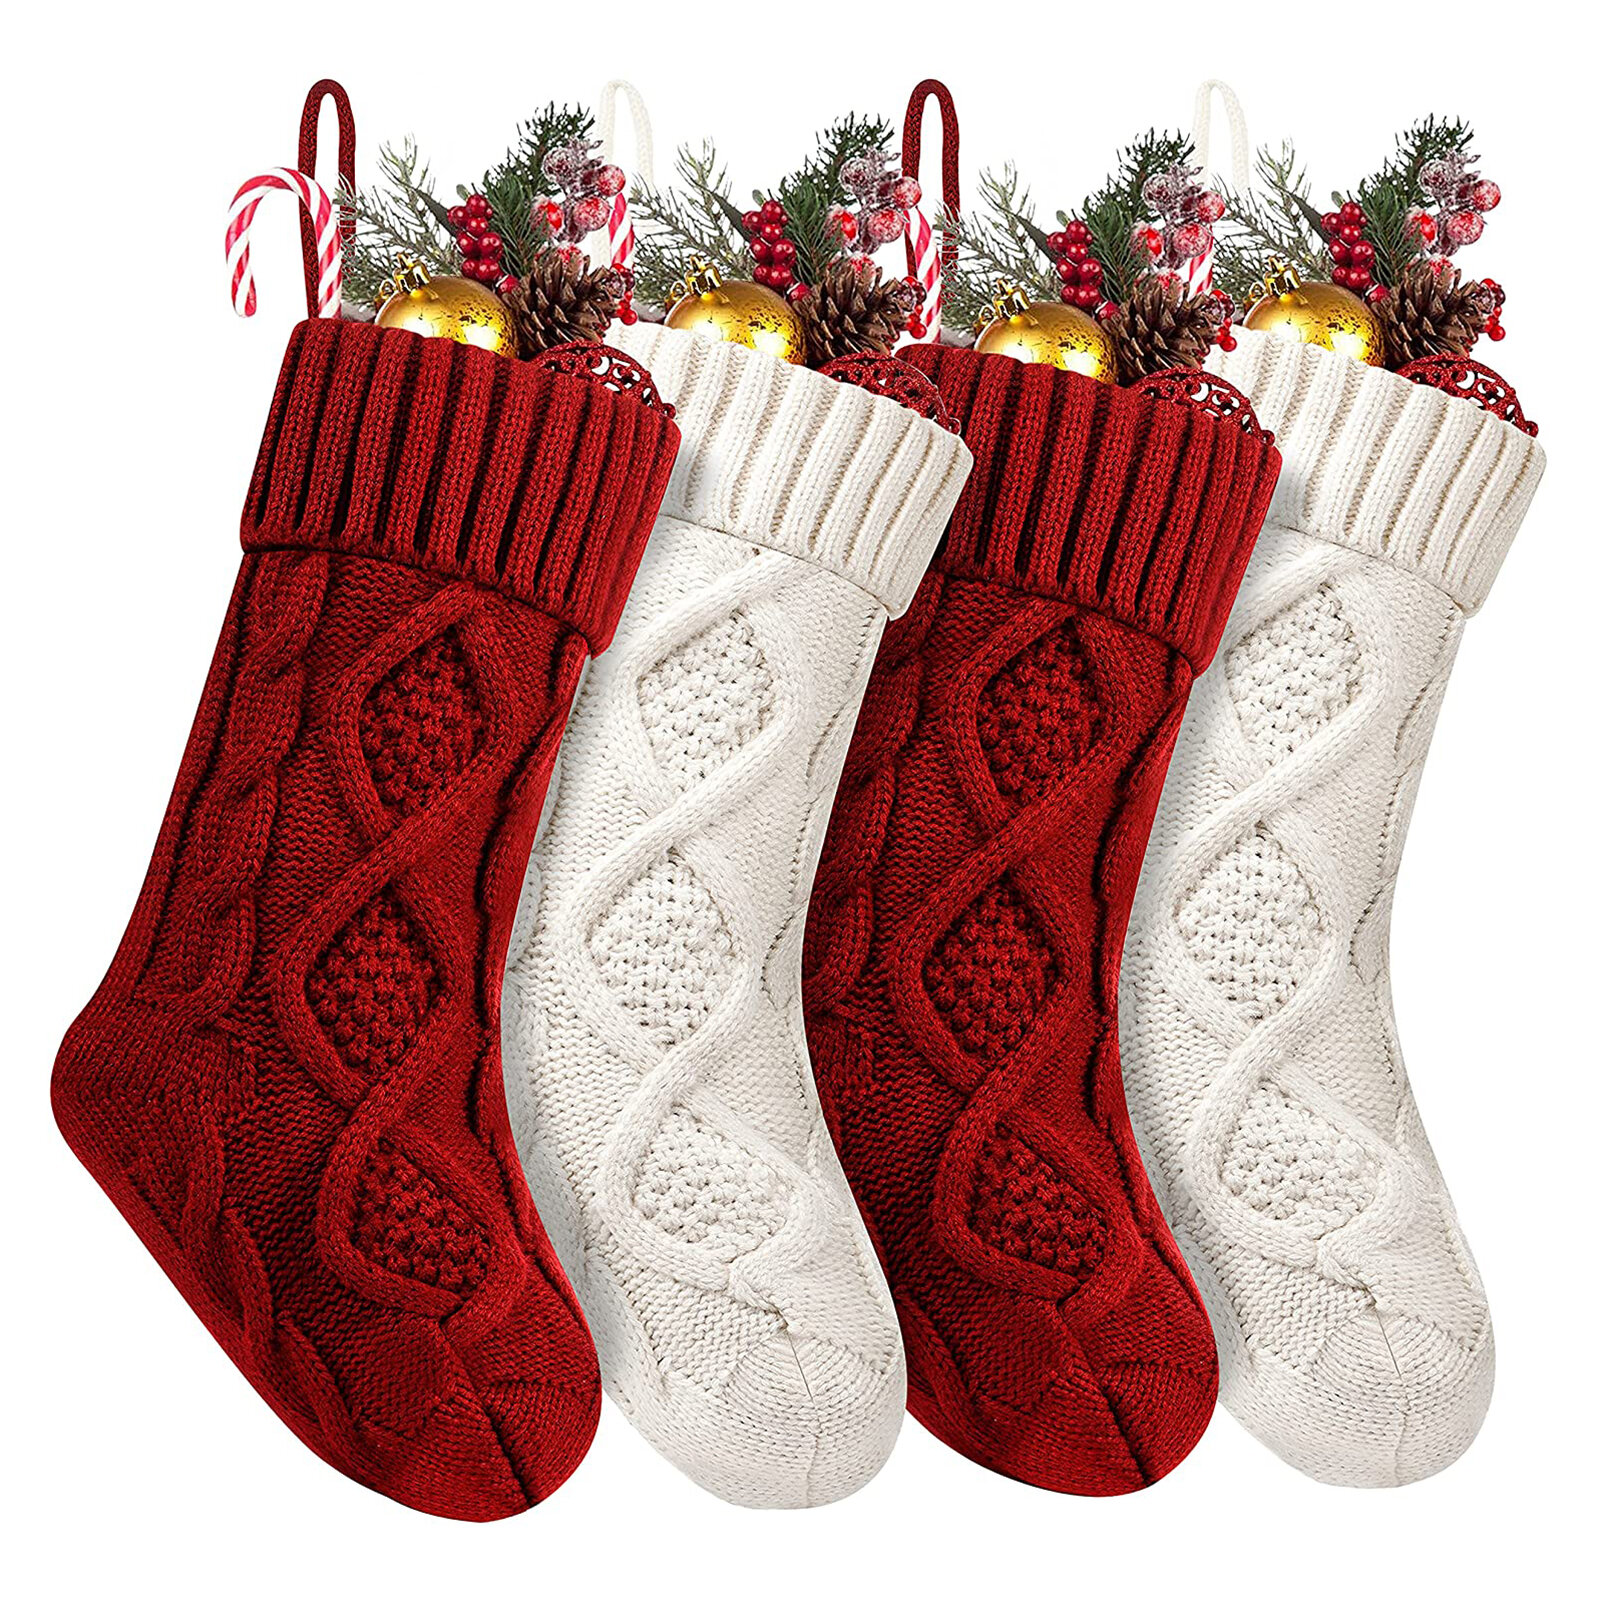 SEVENS Knit Christmas Stockings 4 Pack 18 Large Cable Xmas Stockings Classic Burgundy Red & Ivory White Chunky Hand Stockings